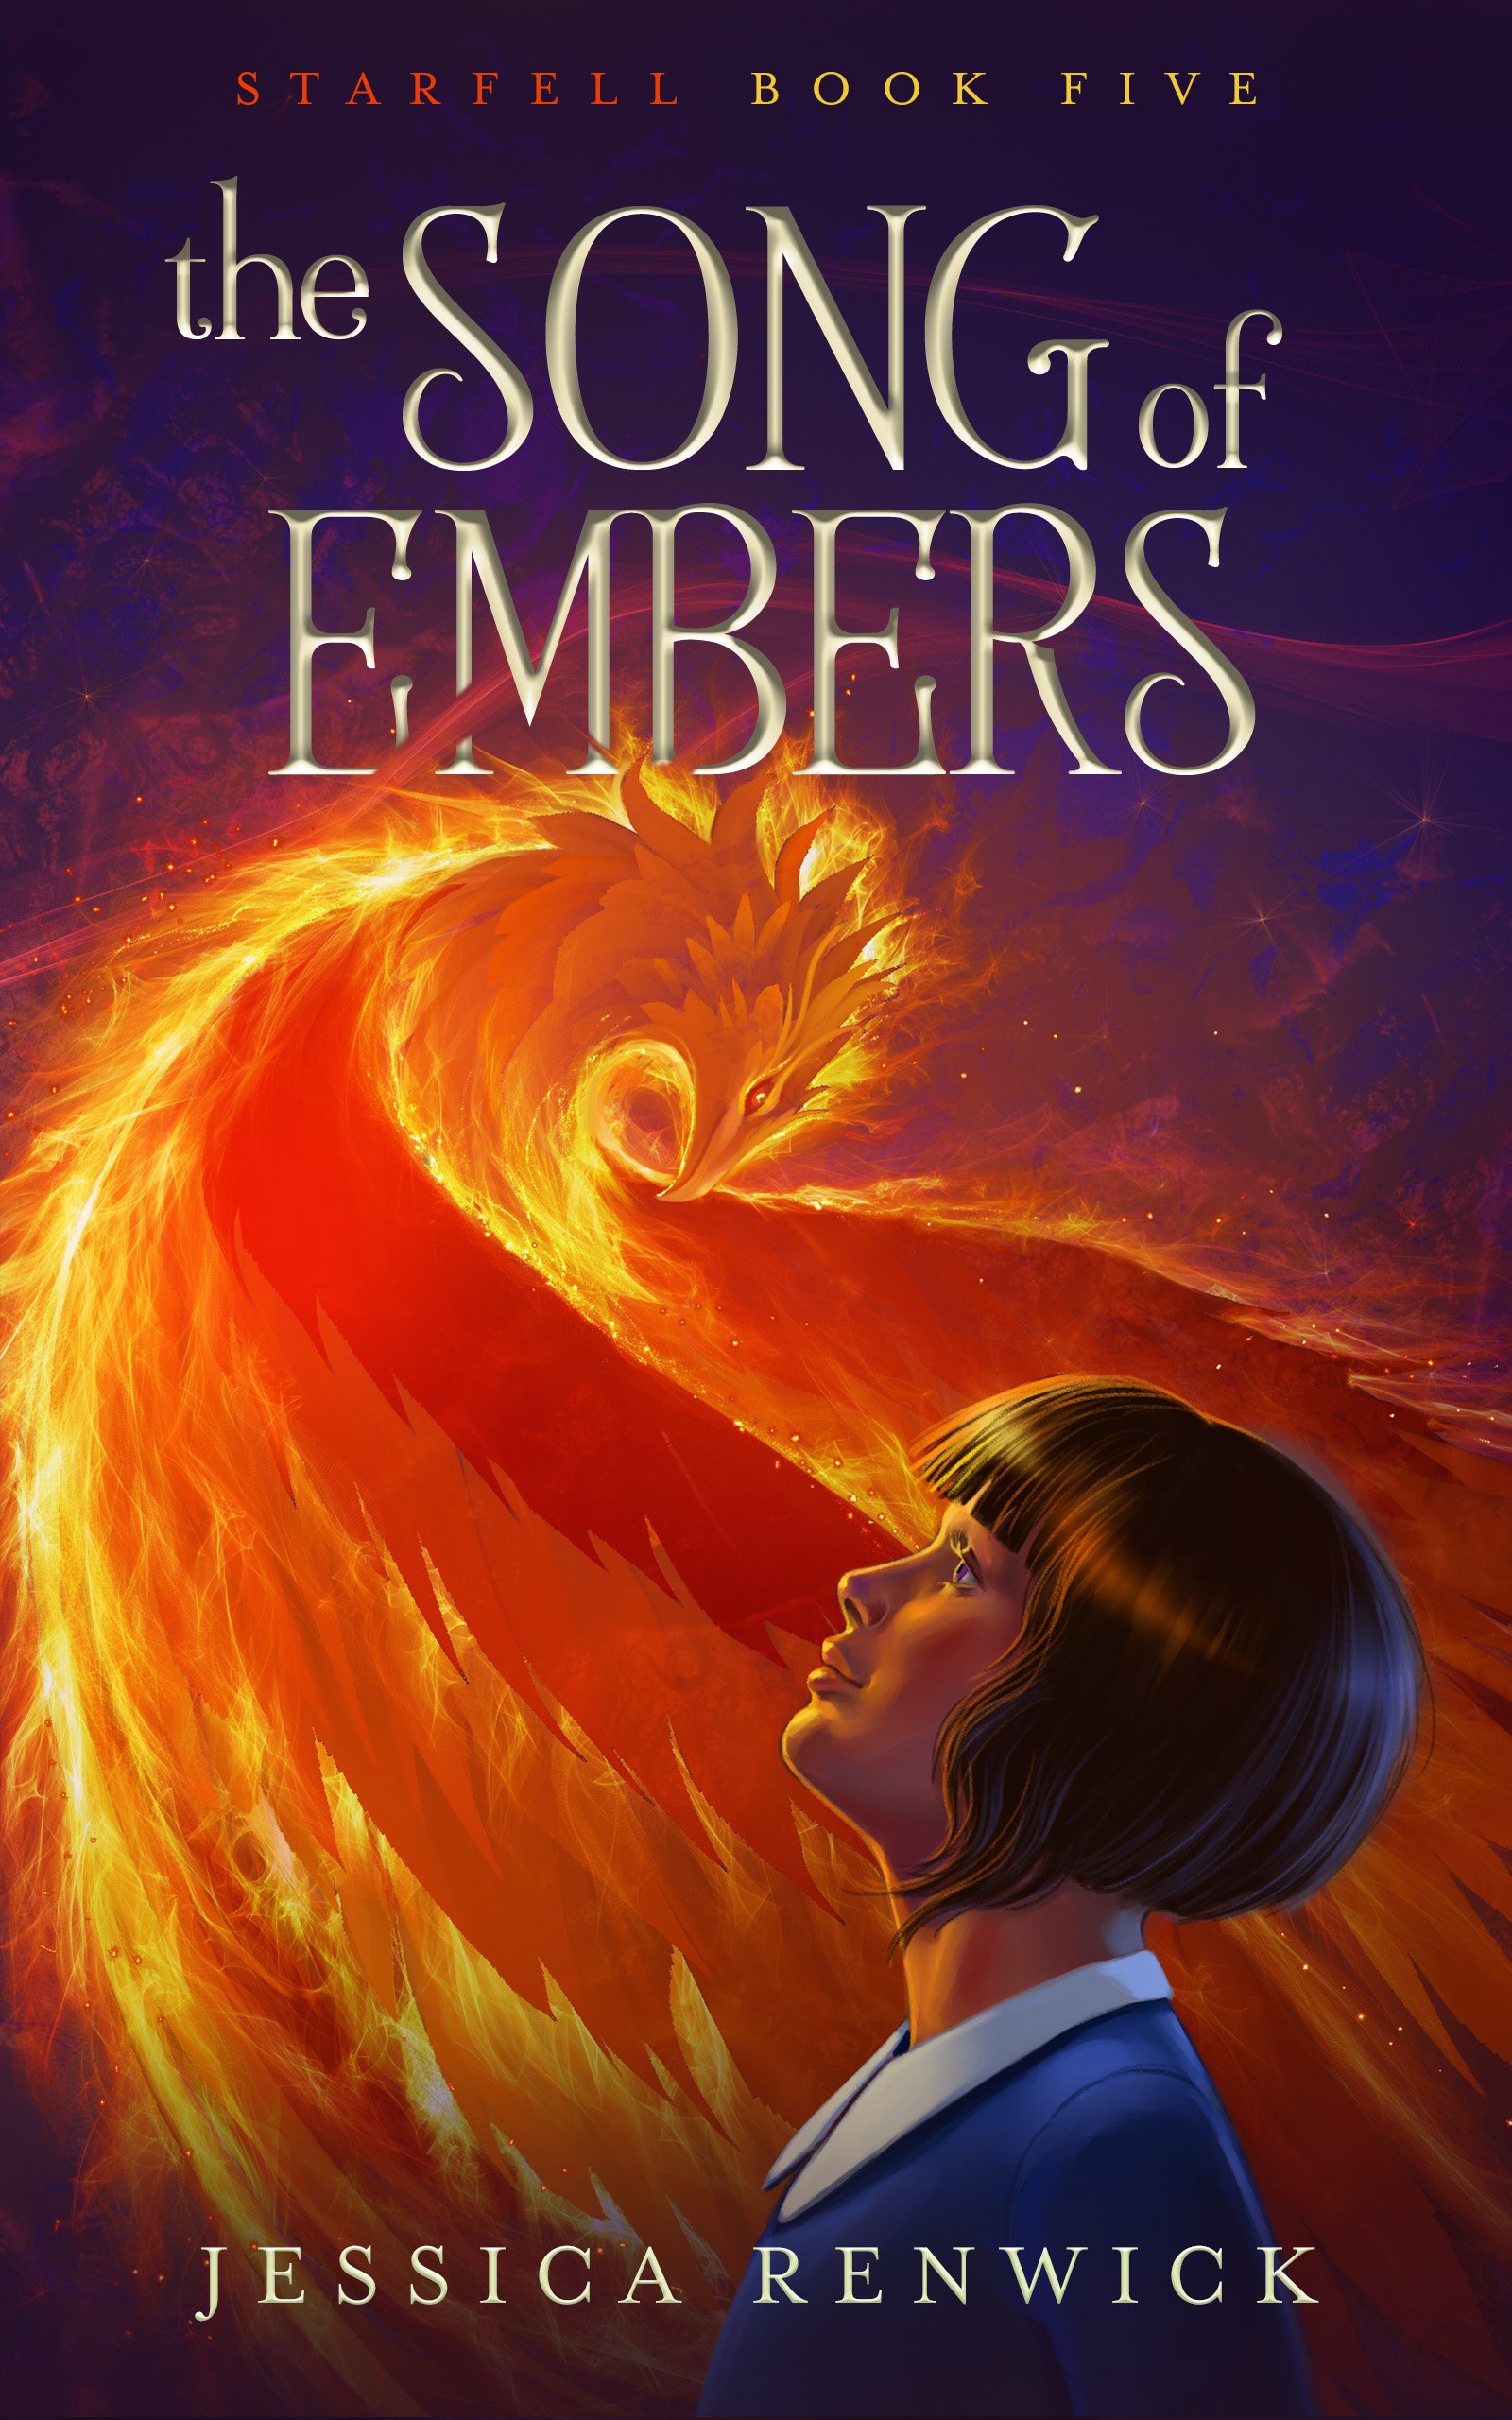 The Song of Embers (Starfell Book 5) by Jessica Renwick (Copy)